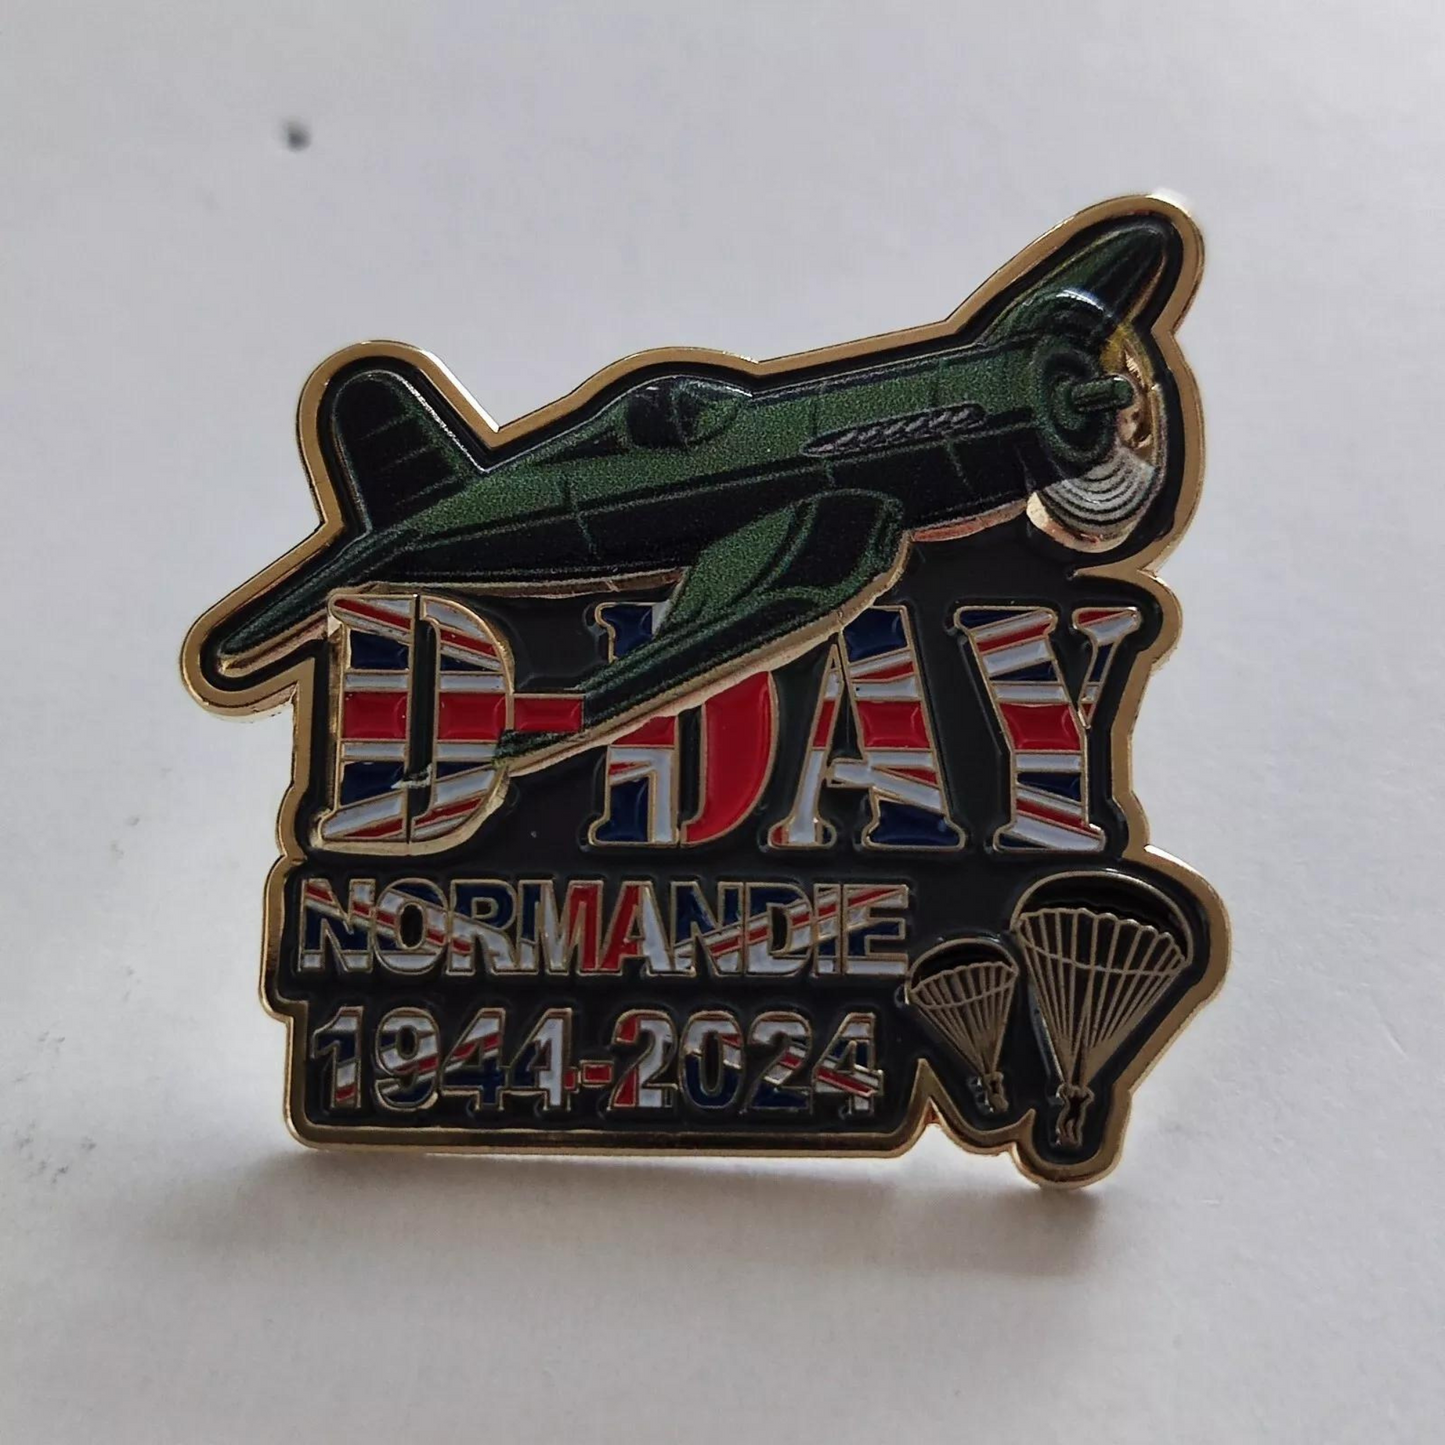 Normandy D-DAY 80th Anniversary Pin Badge